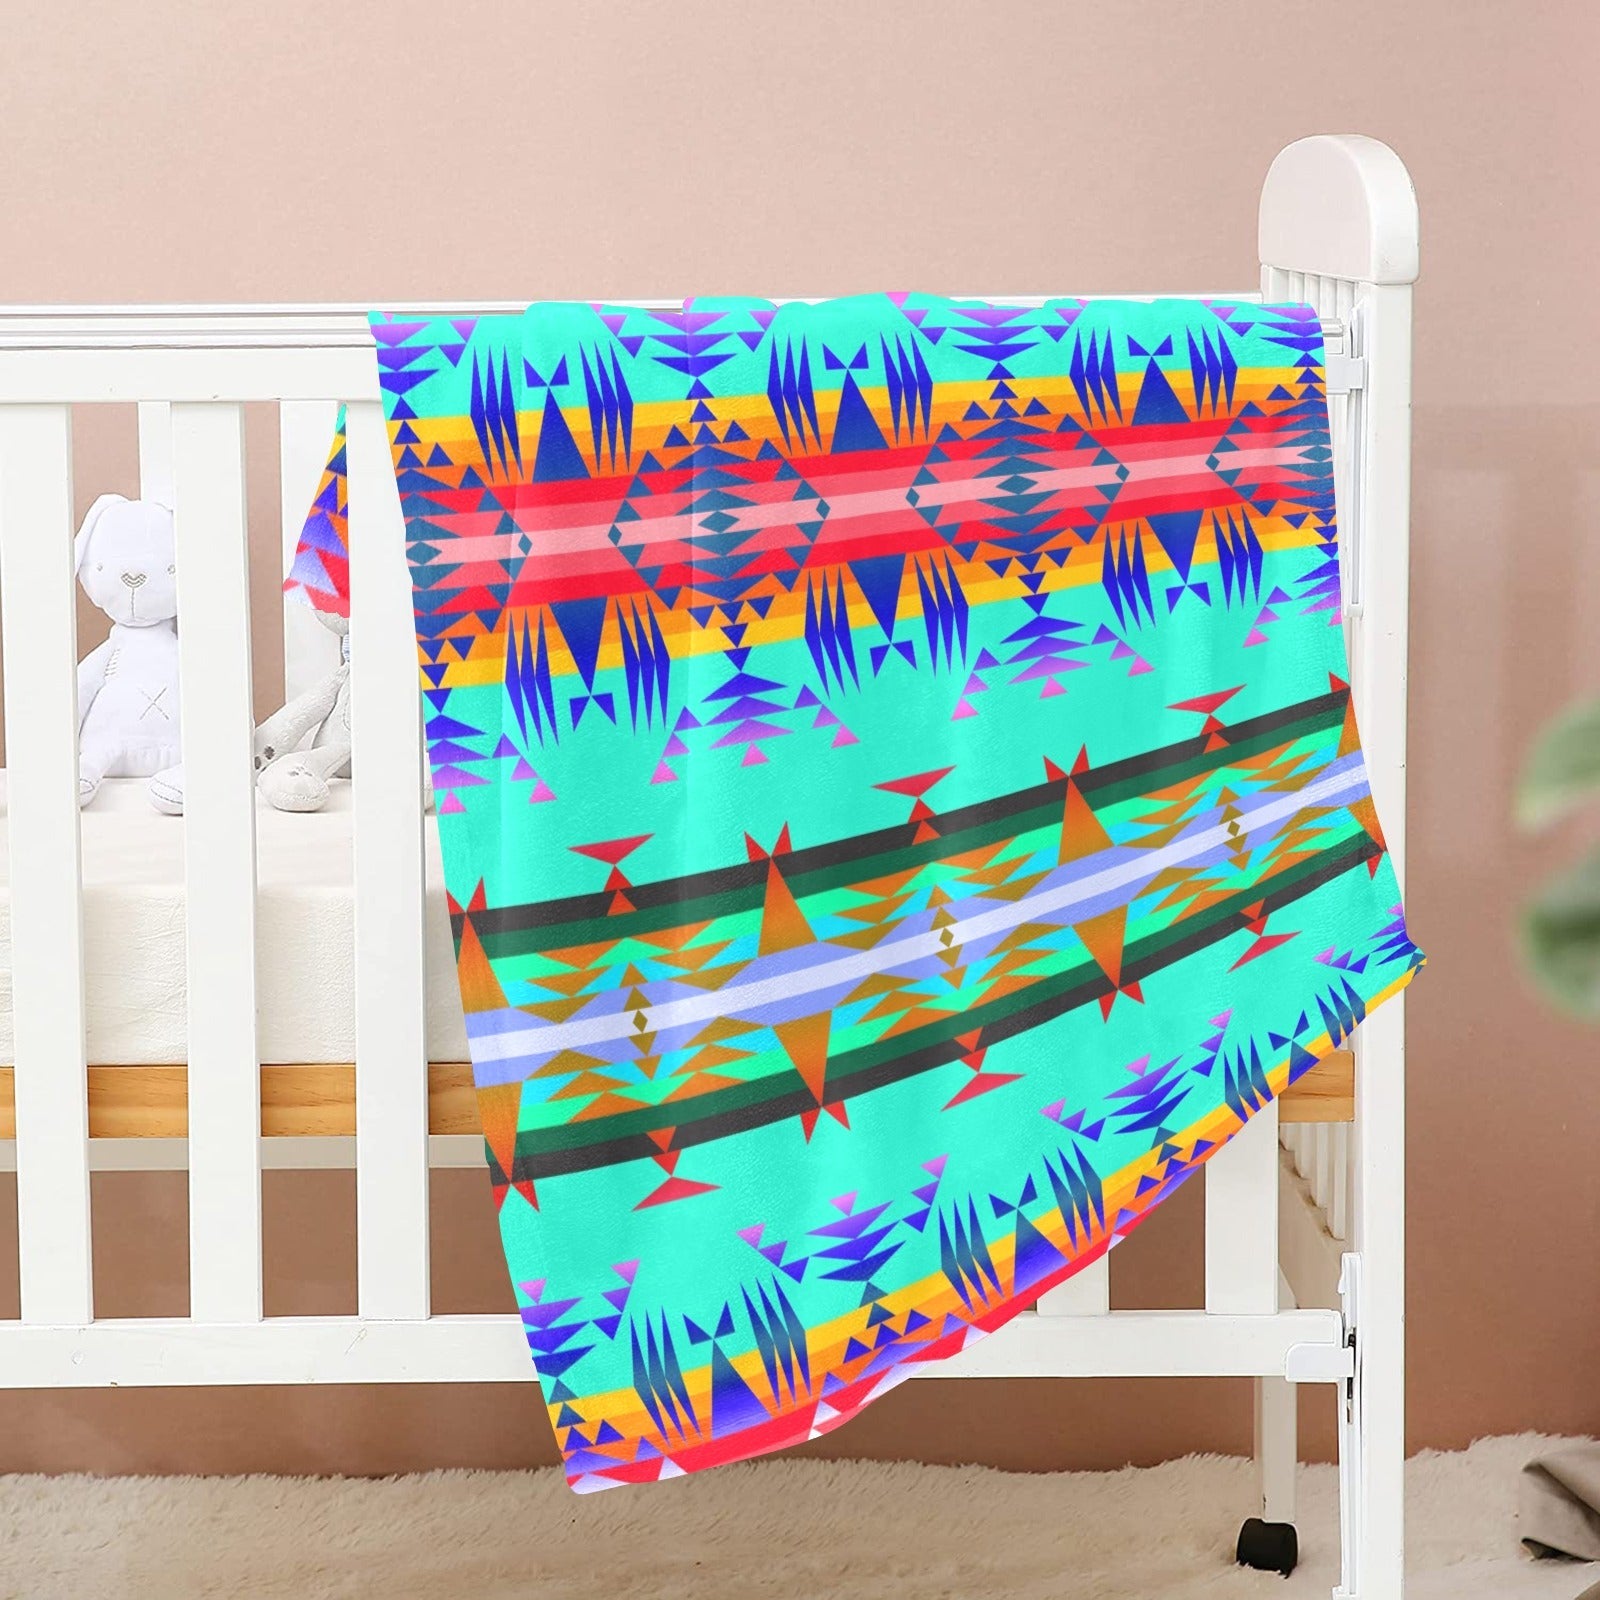 Between the Mountains Spring Baby Blanket 40"x50" Baby Blanket 40"x50" e-joyer 